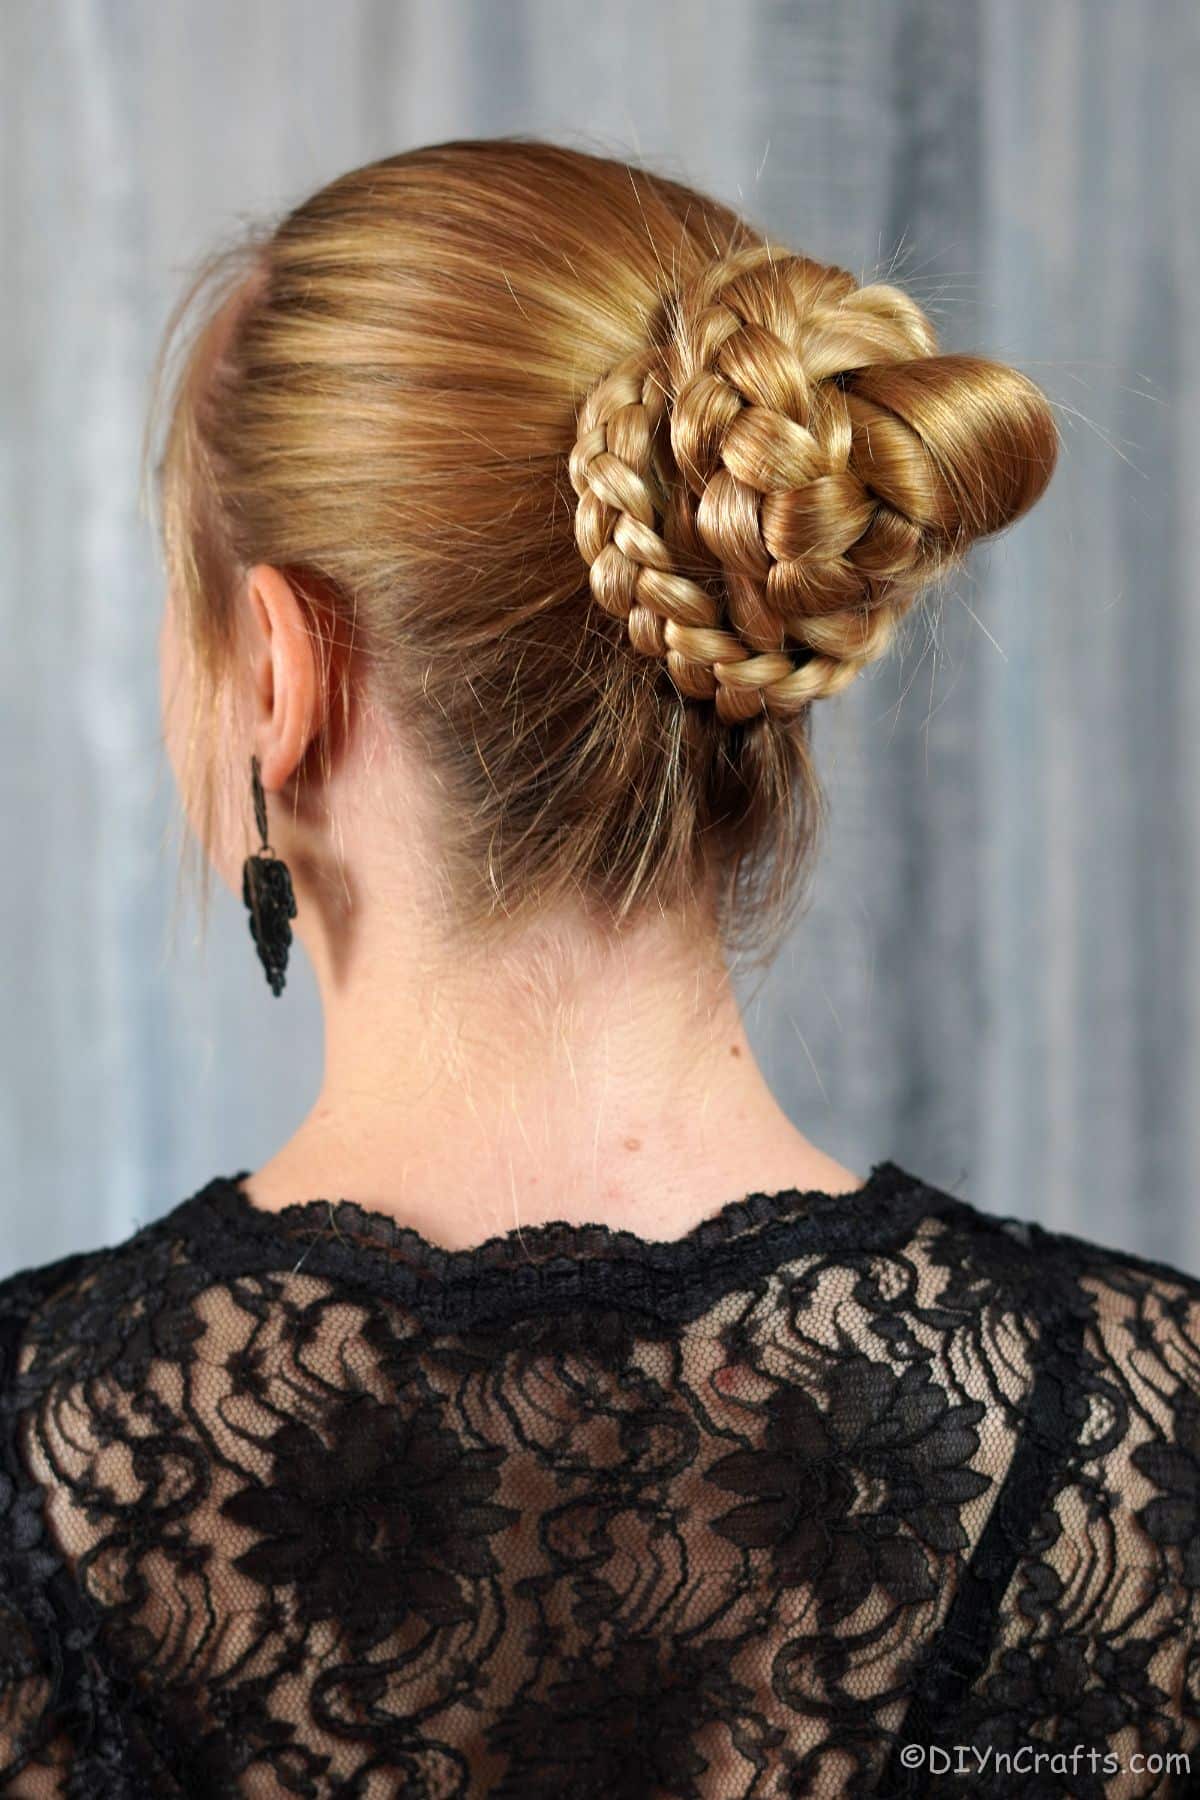 woman in black lace shirt with twisted braid bun